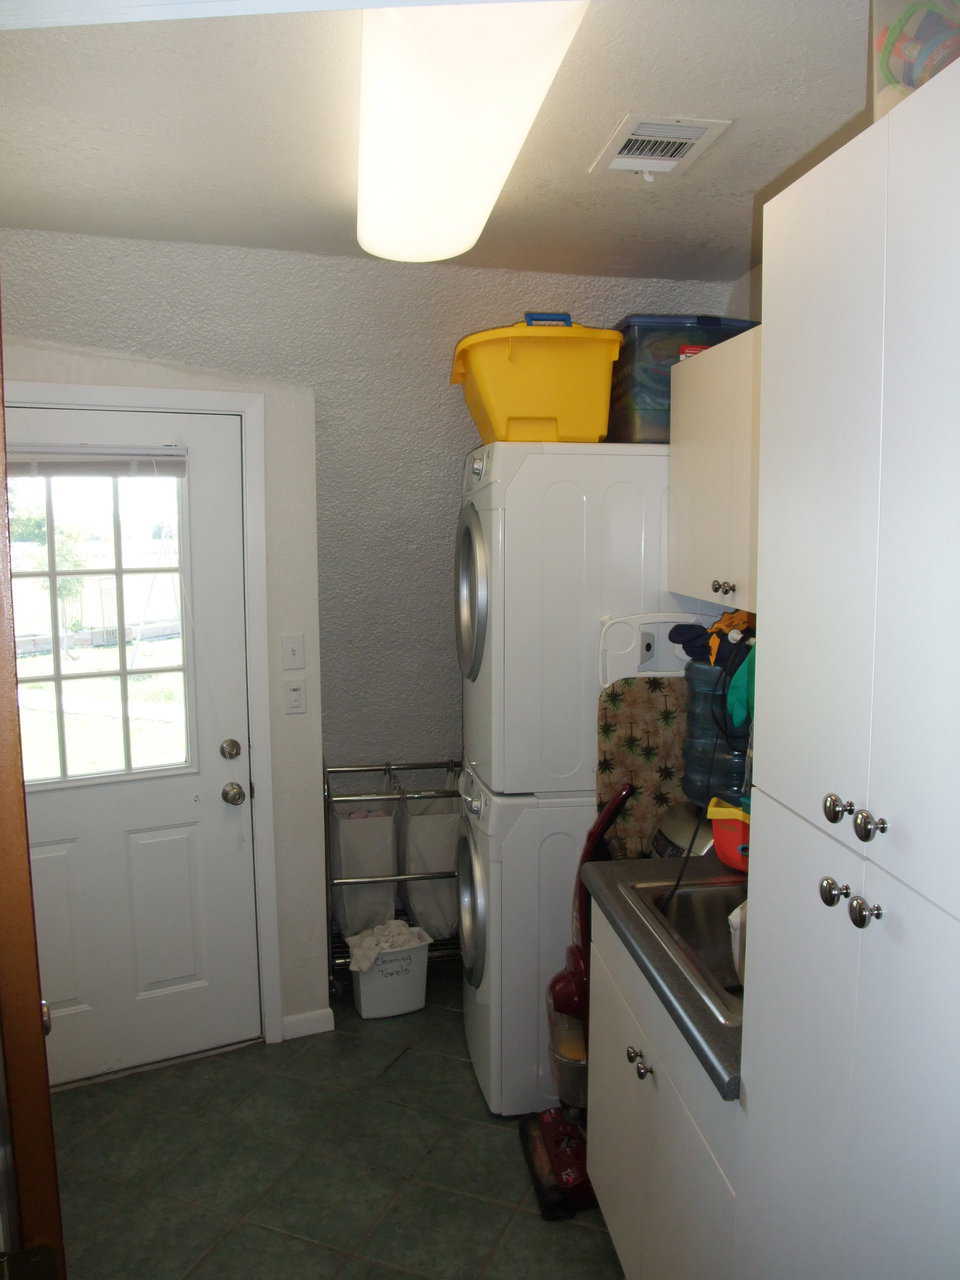 Laundry area — in addition to the washer and dryer, it includes a sink and storage cabinets.